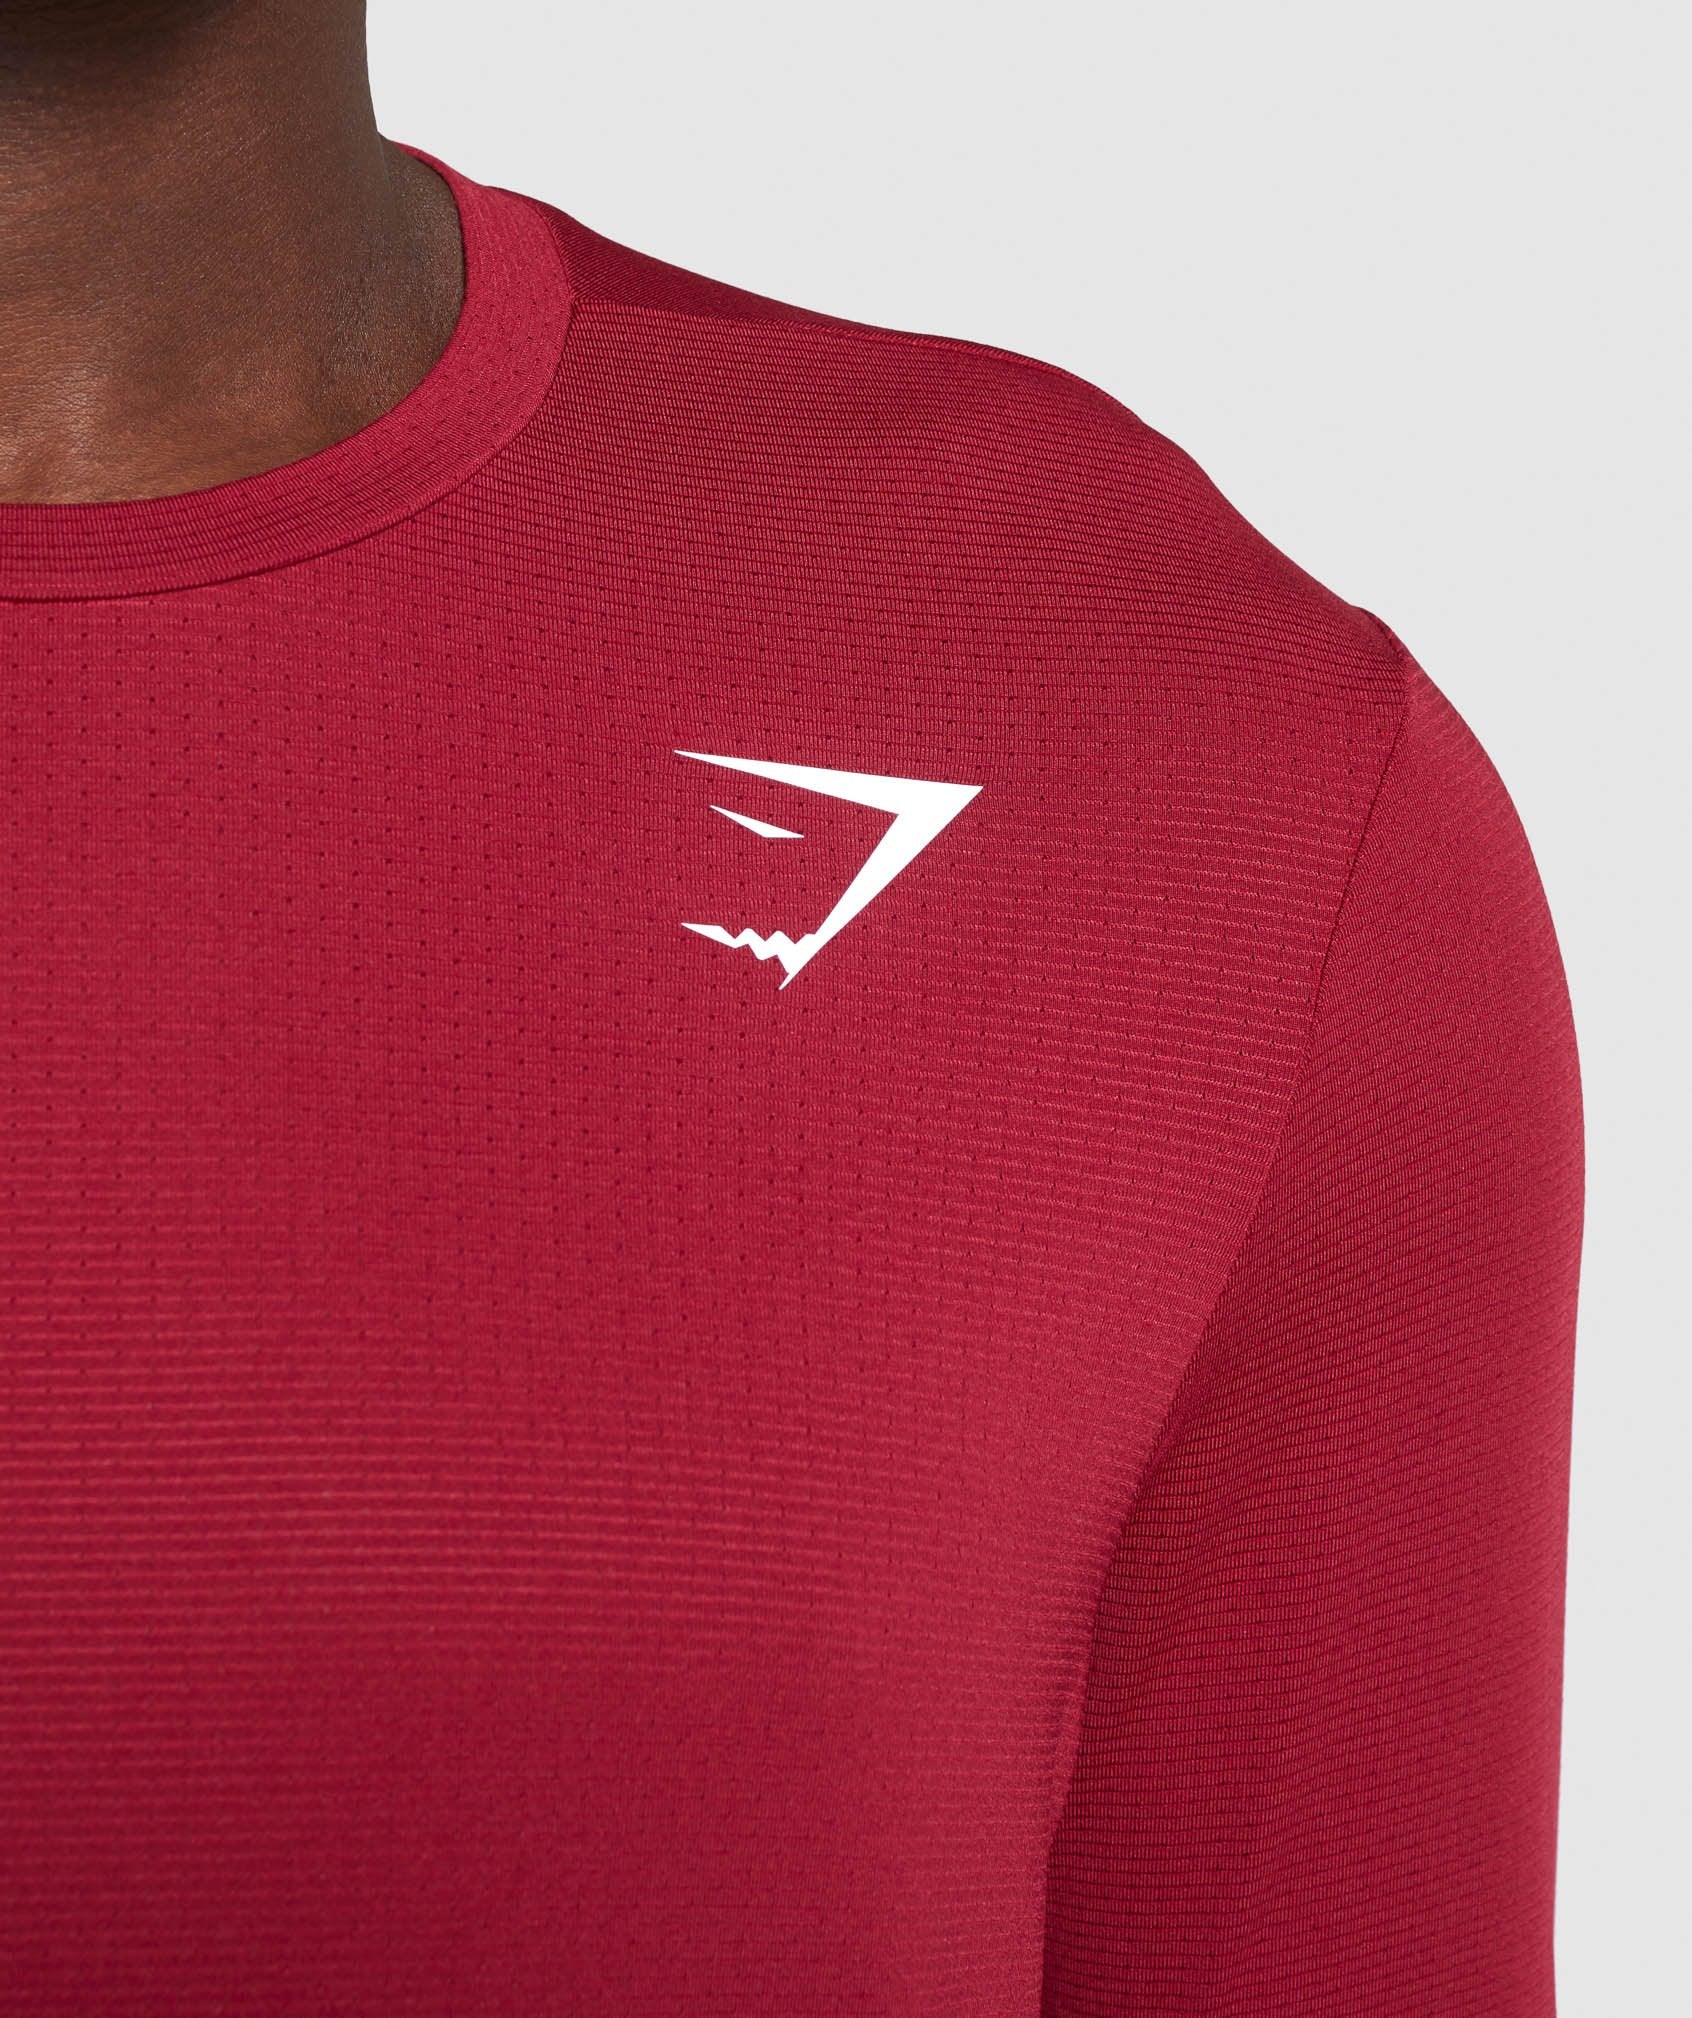 Arrival Long Sleeve T-Shirt in Claret - view 5